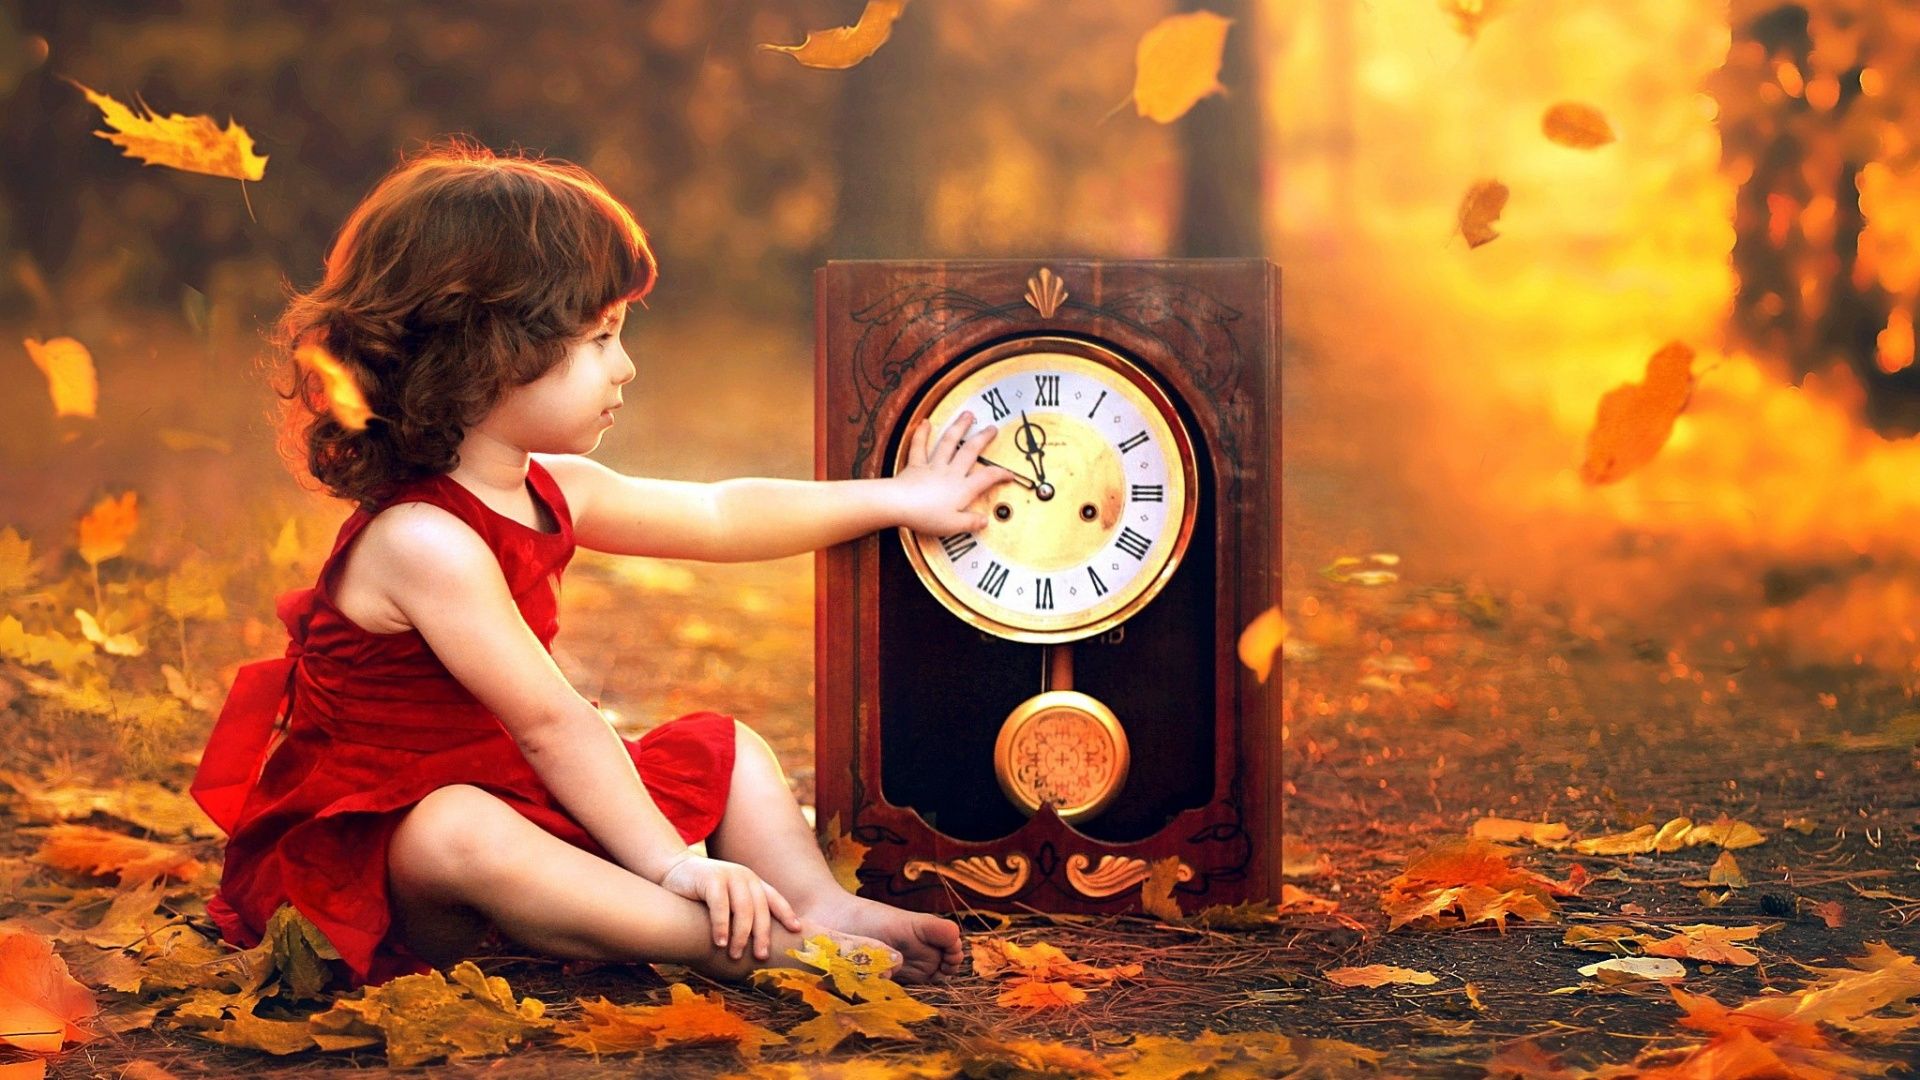 Girl Watch And Autumn Leaves Wallpaper